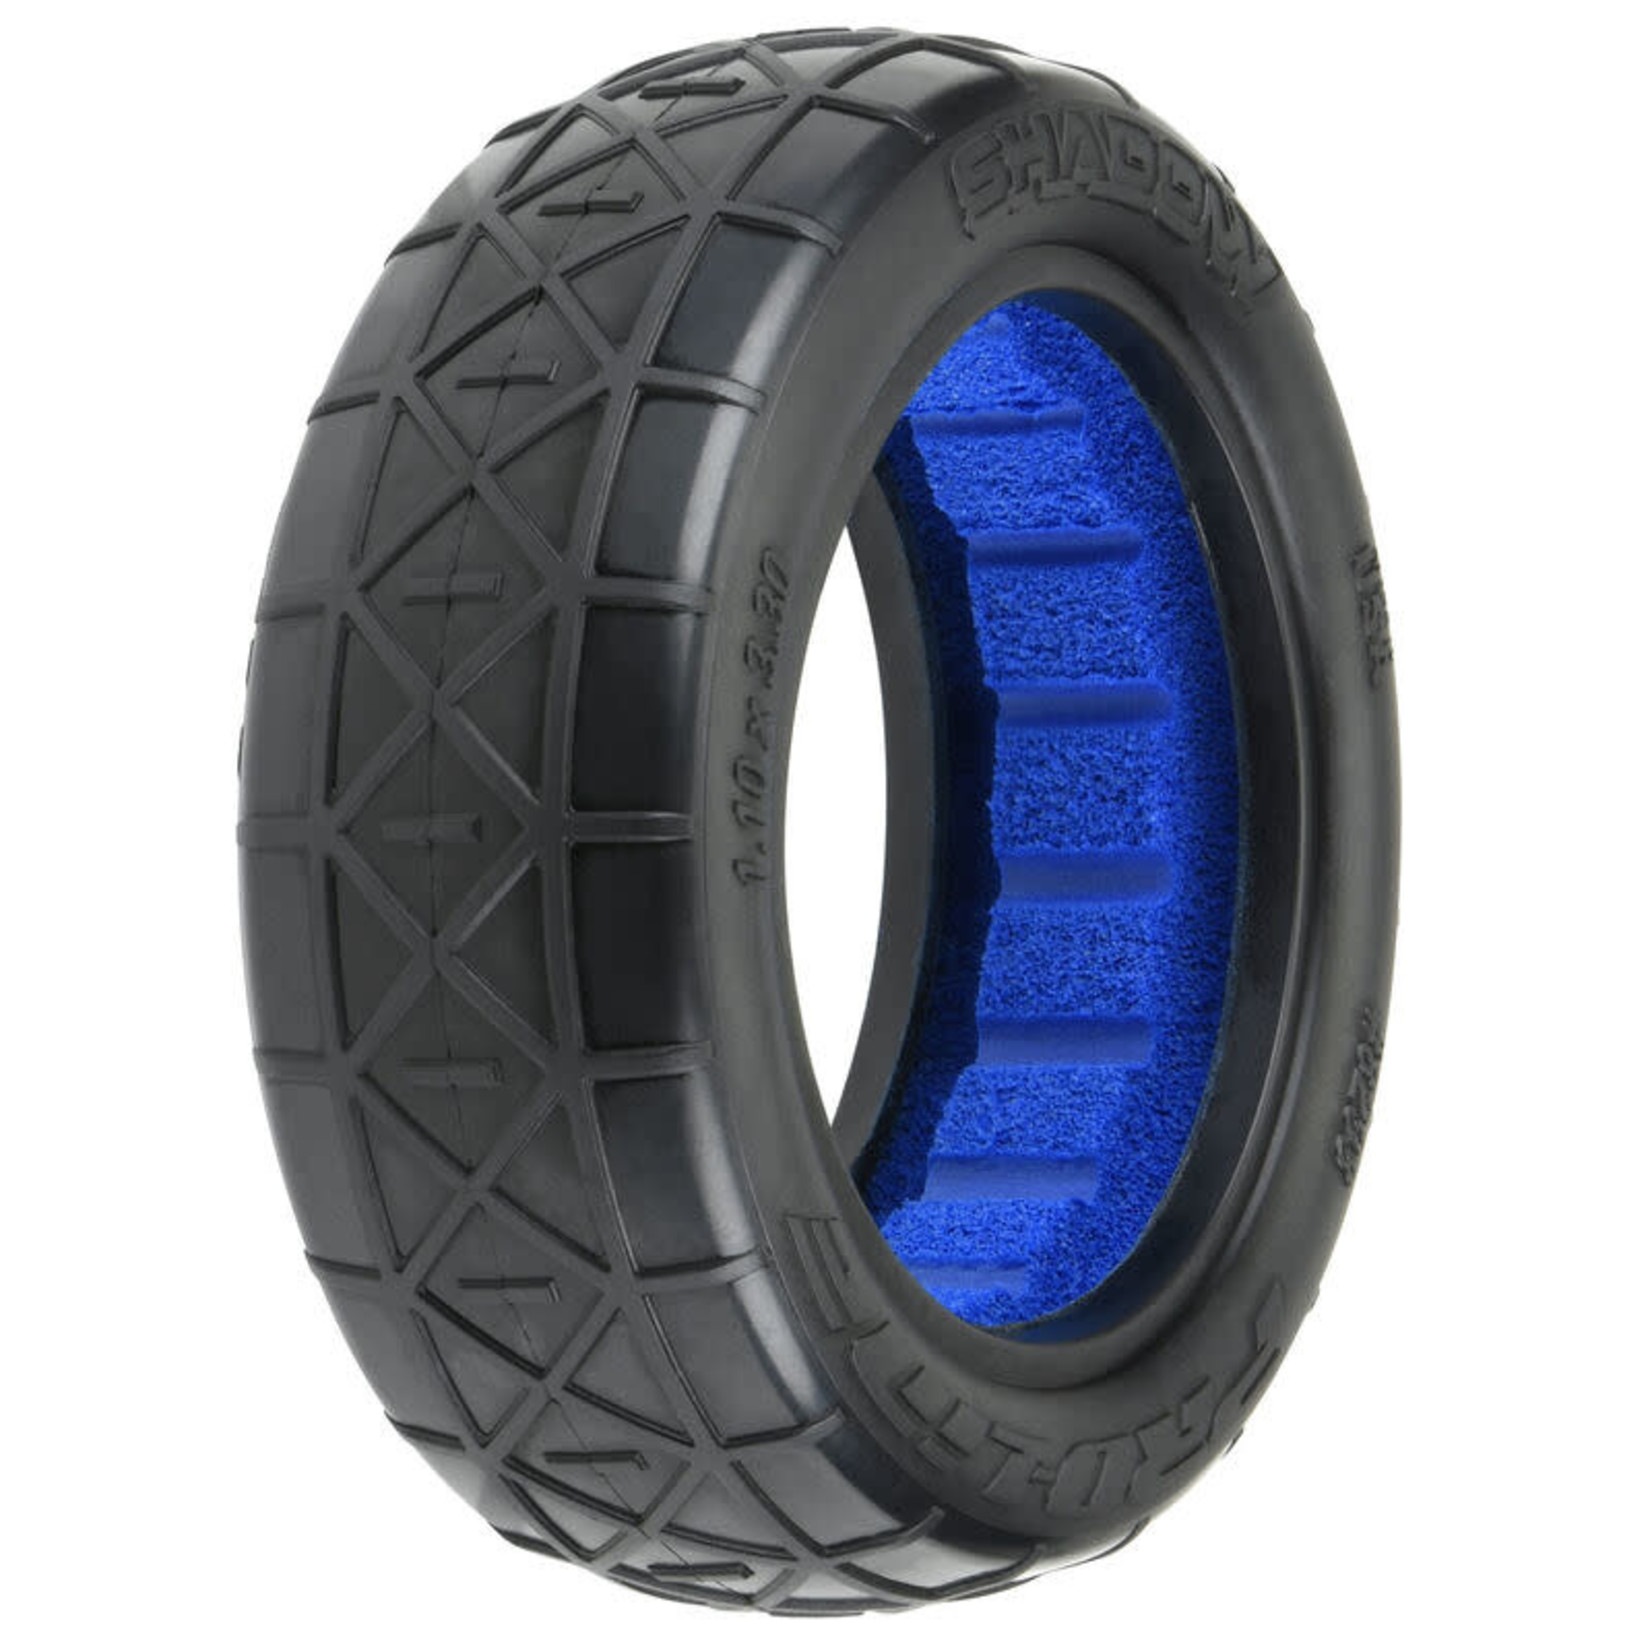 Pro-line Racing PRO829317 Pro-Line 1/10 Shadow MC 2WD Front 2.2" Off-Road Buggy Tires (2)